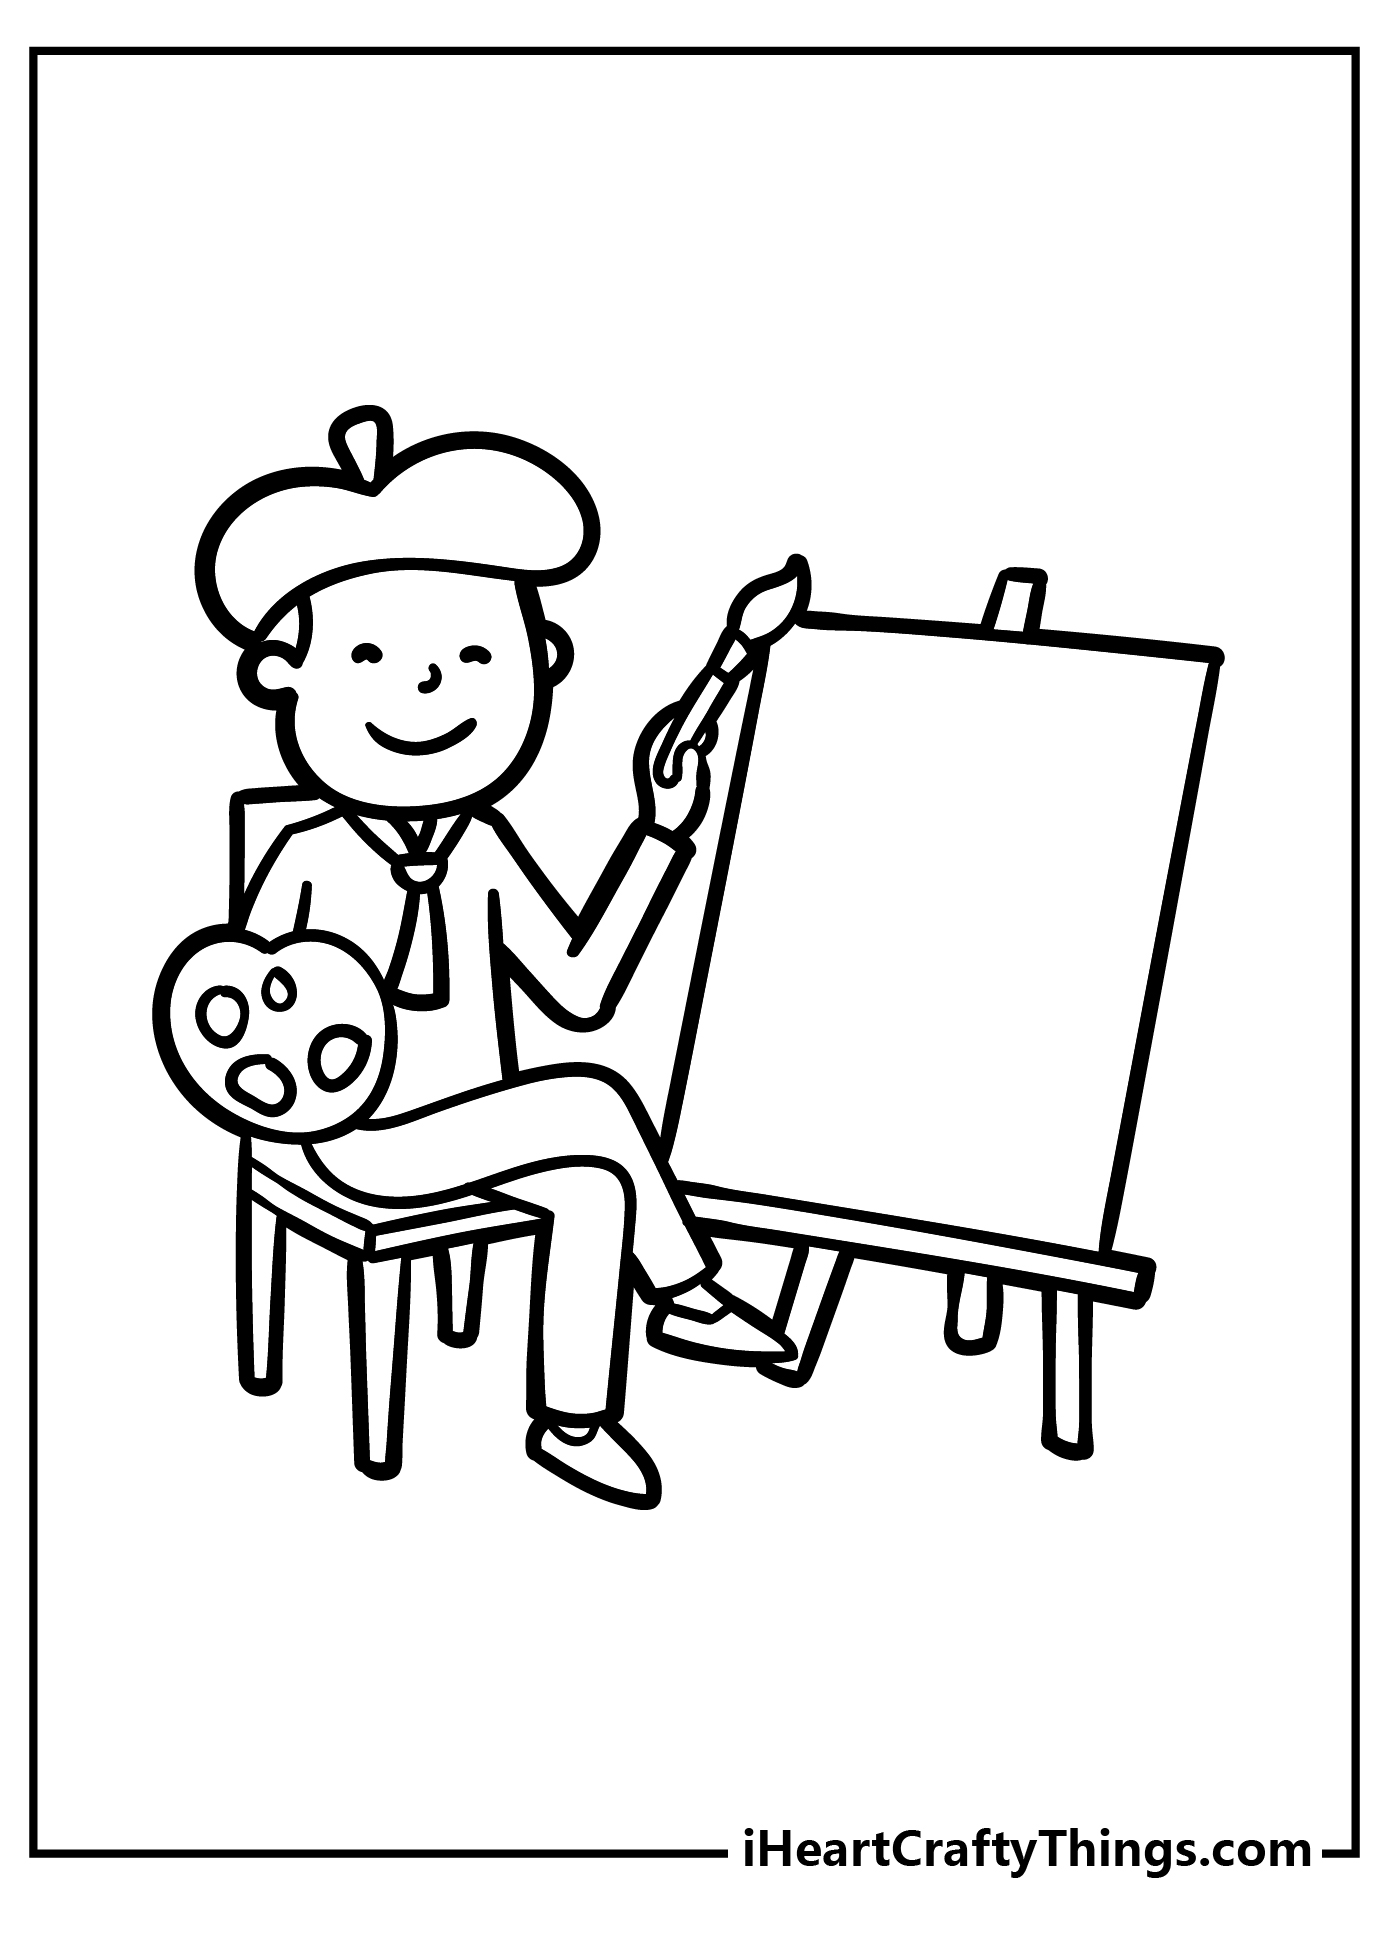 Painting Coloring Original Sheet for children free download